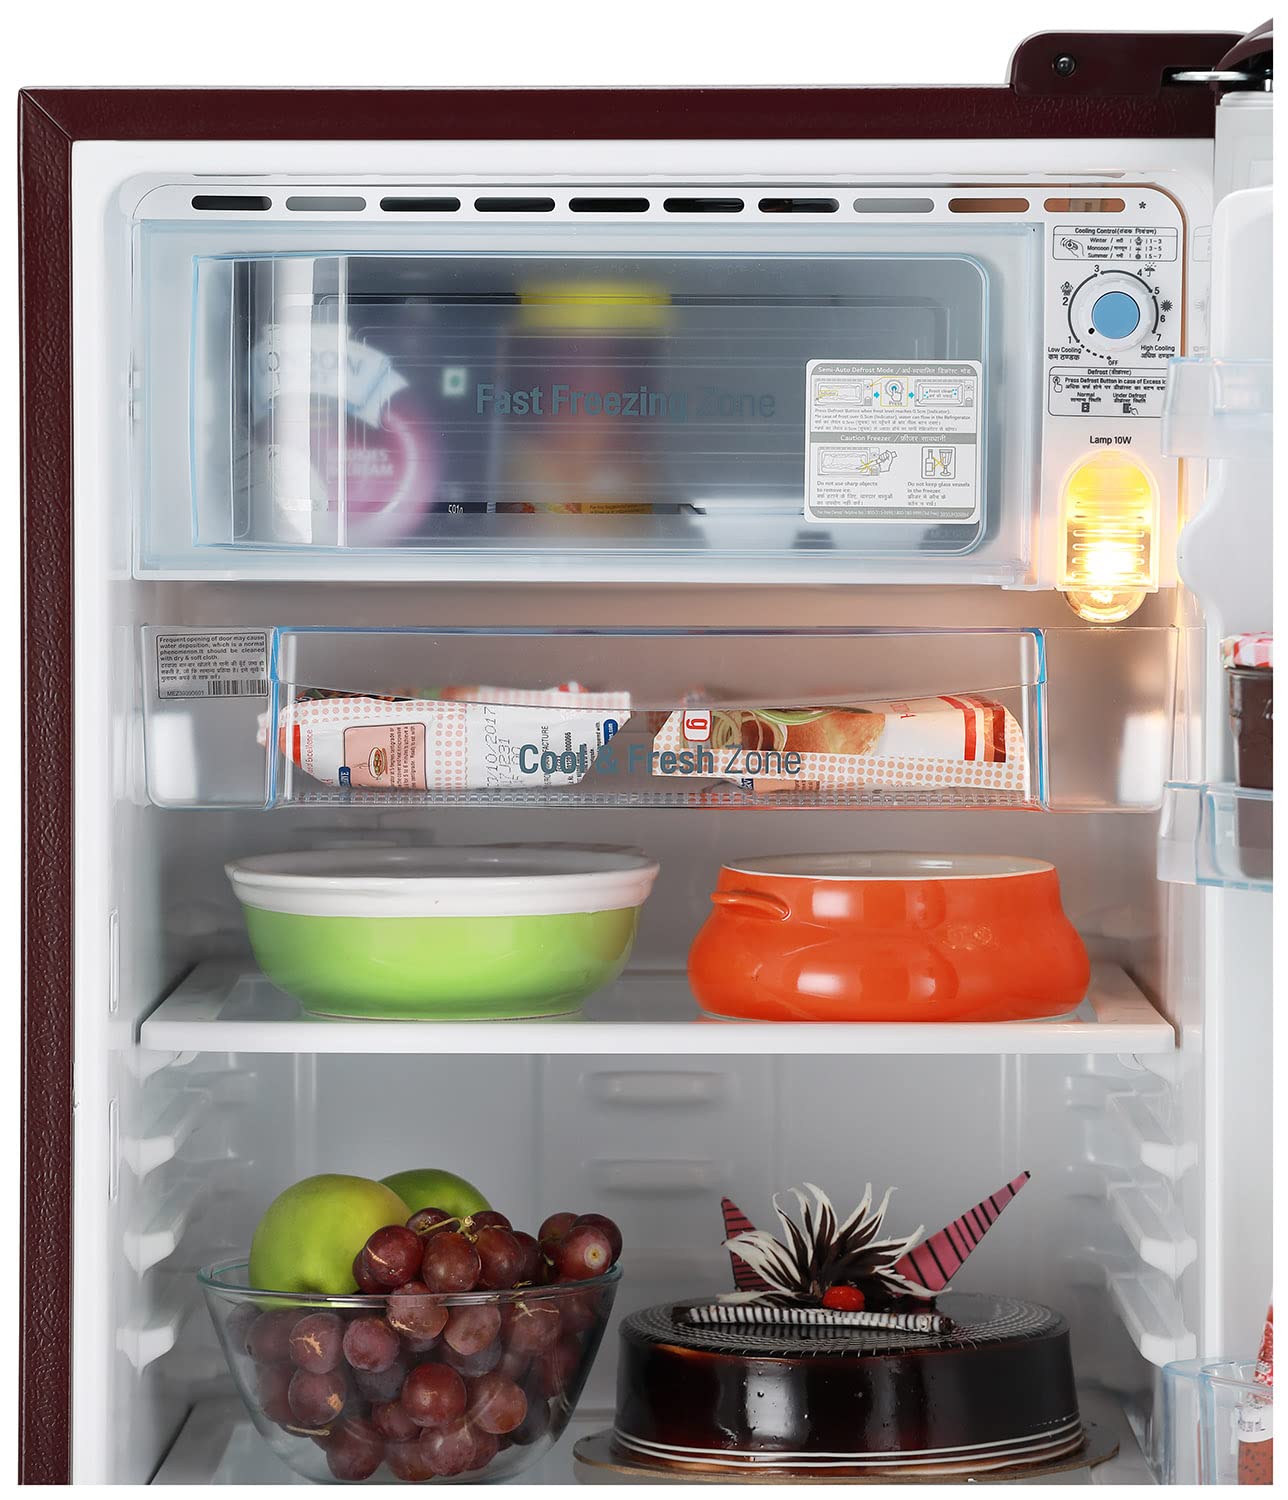 LG 190L 5 Star Inverter Direct-Cool Single Door Refrigerator (GL-D201ASEZ, Scarlet Euphoria, Base stand with drawer), Red